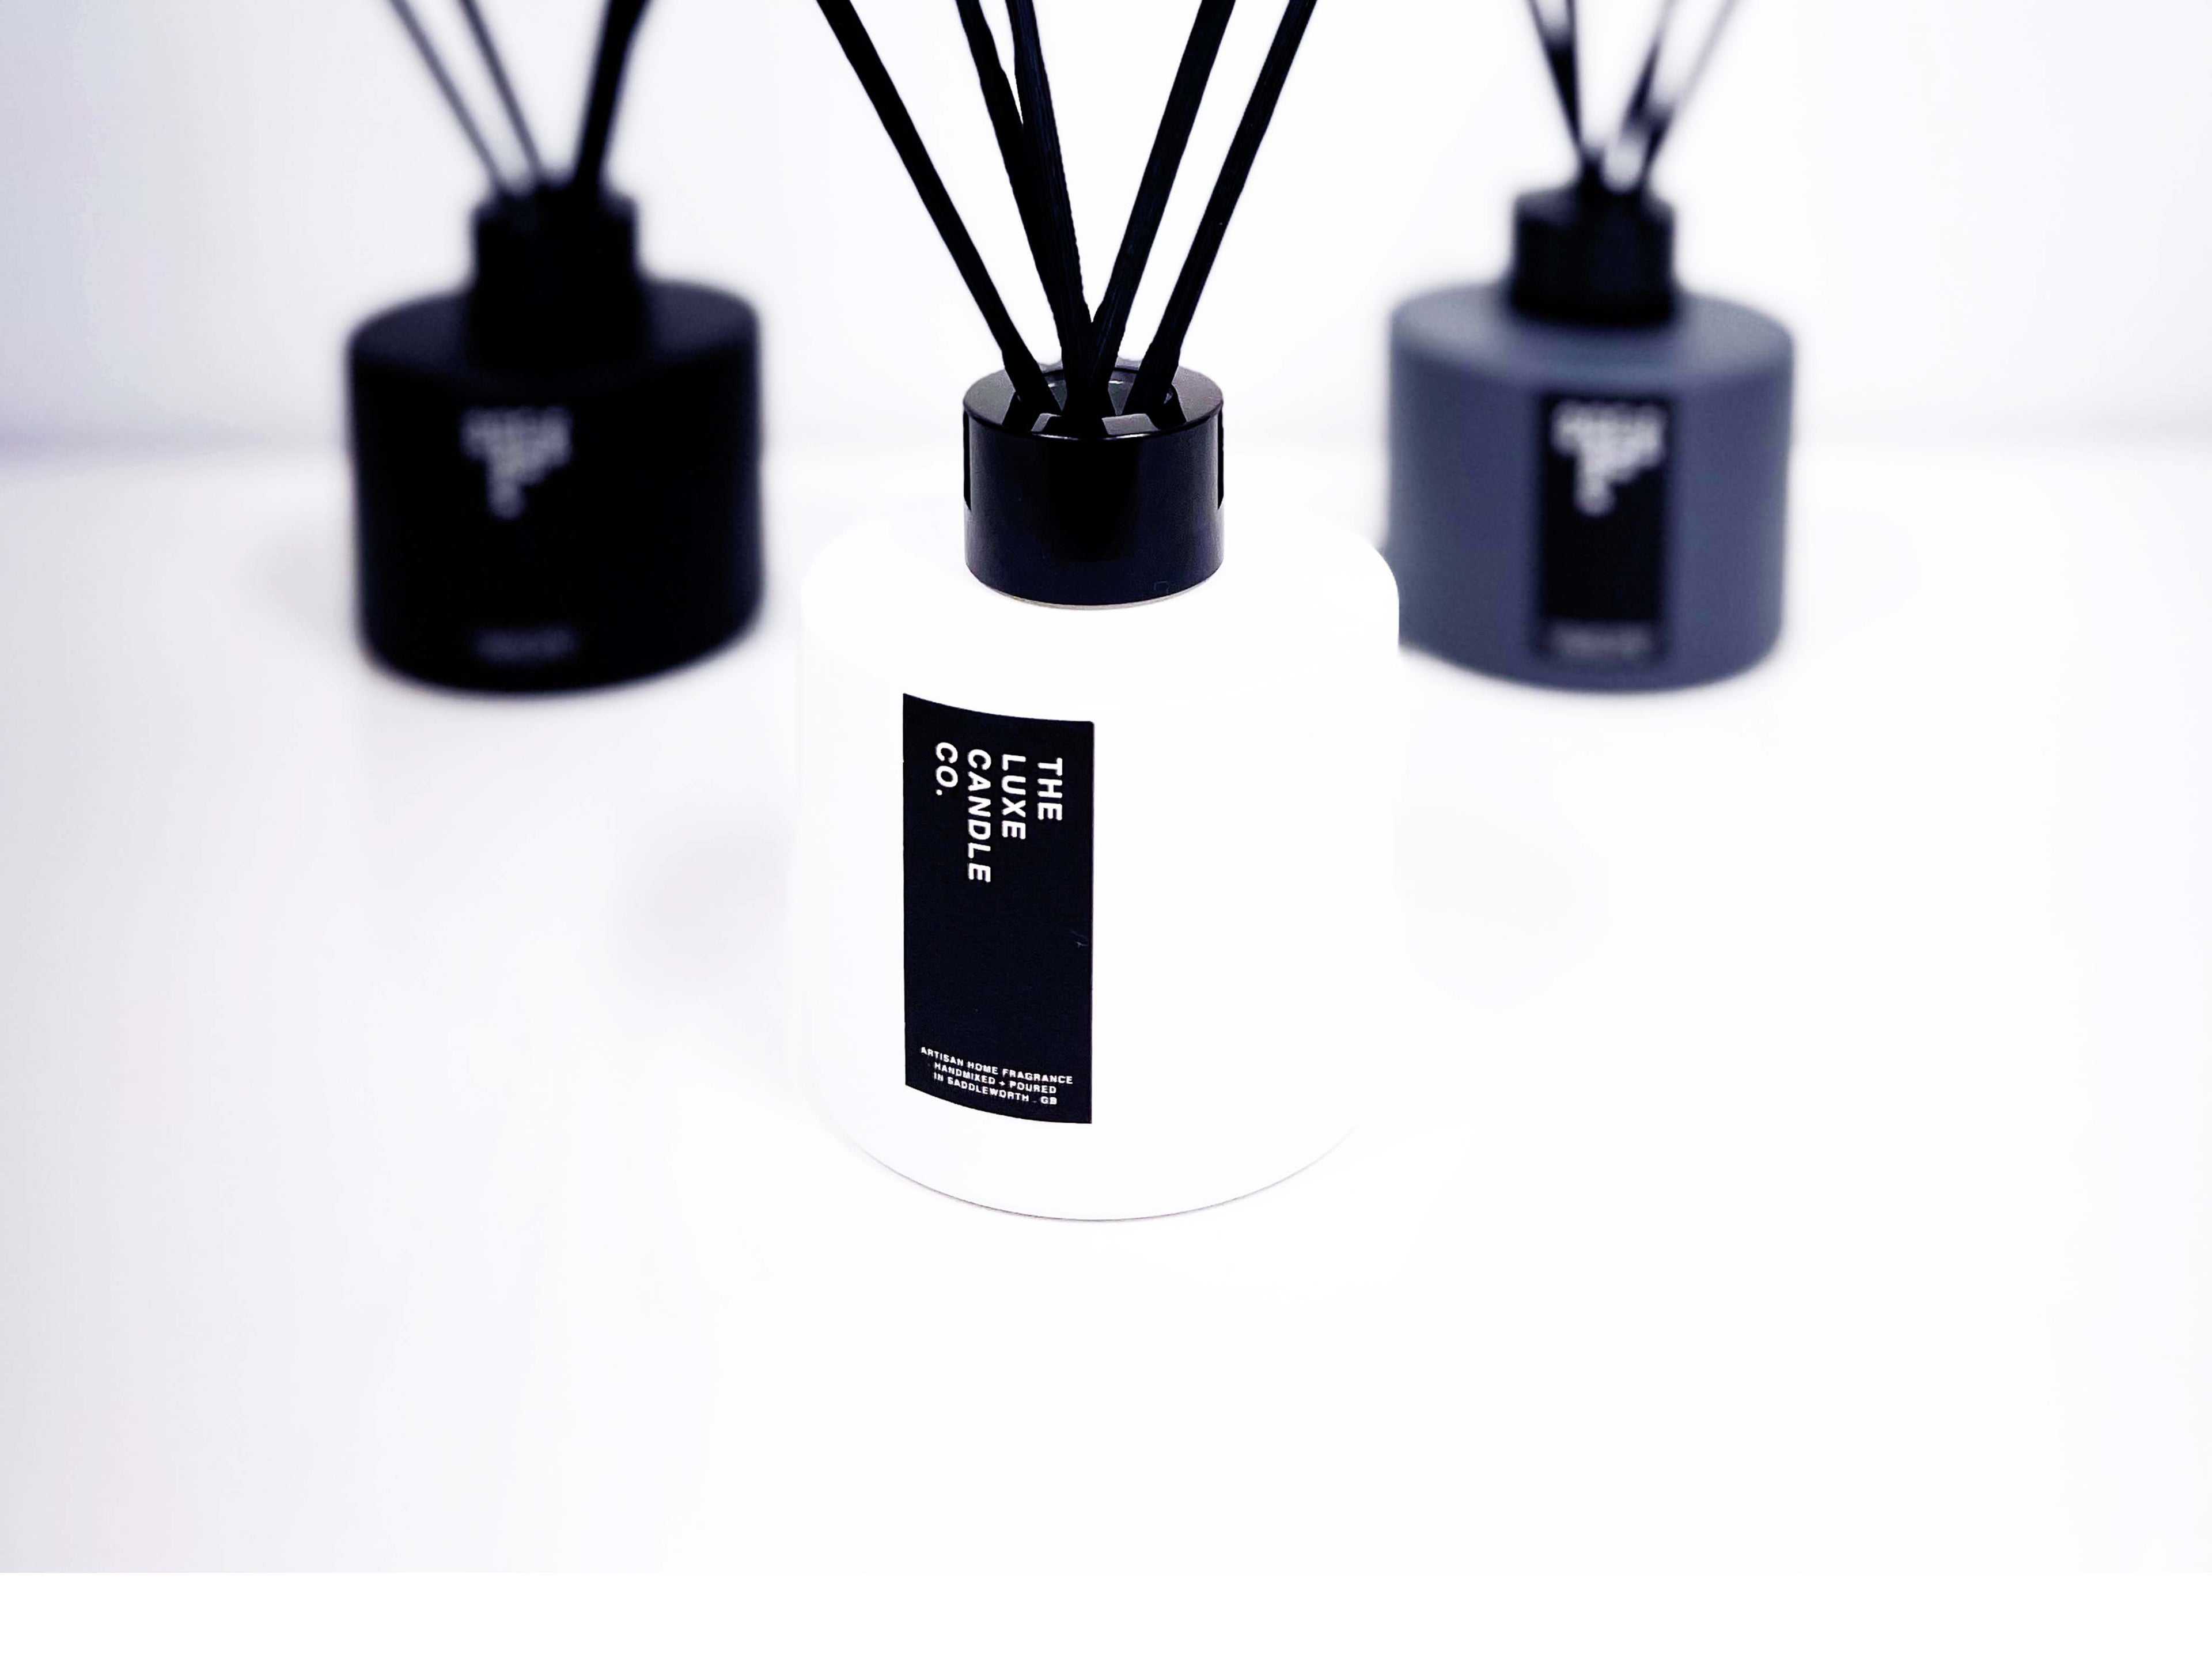 Monochrome modern contemporary home fragrance LUXURY reed diffusers